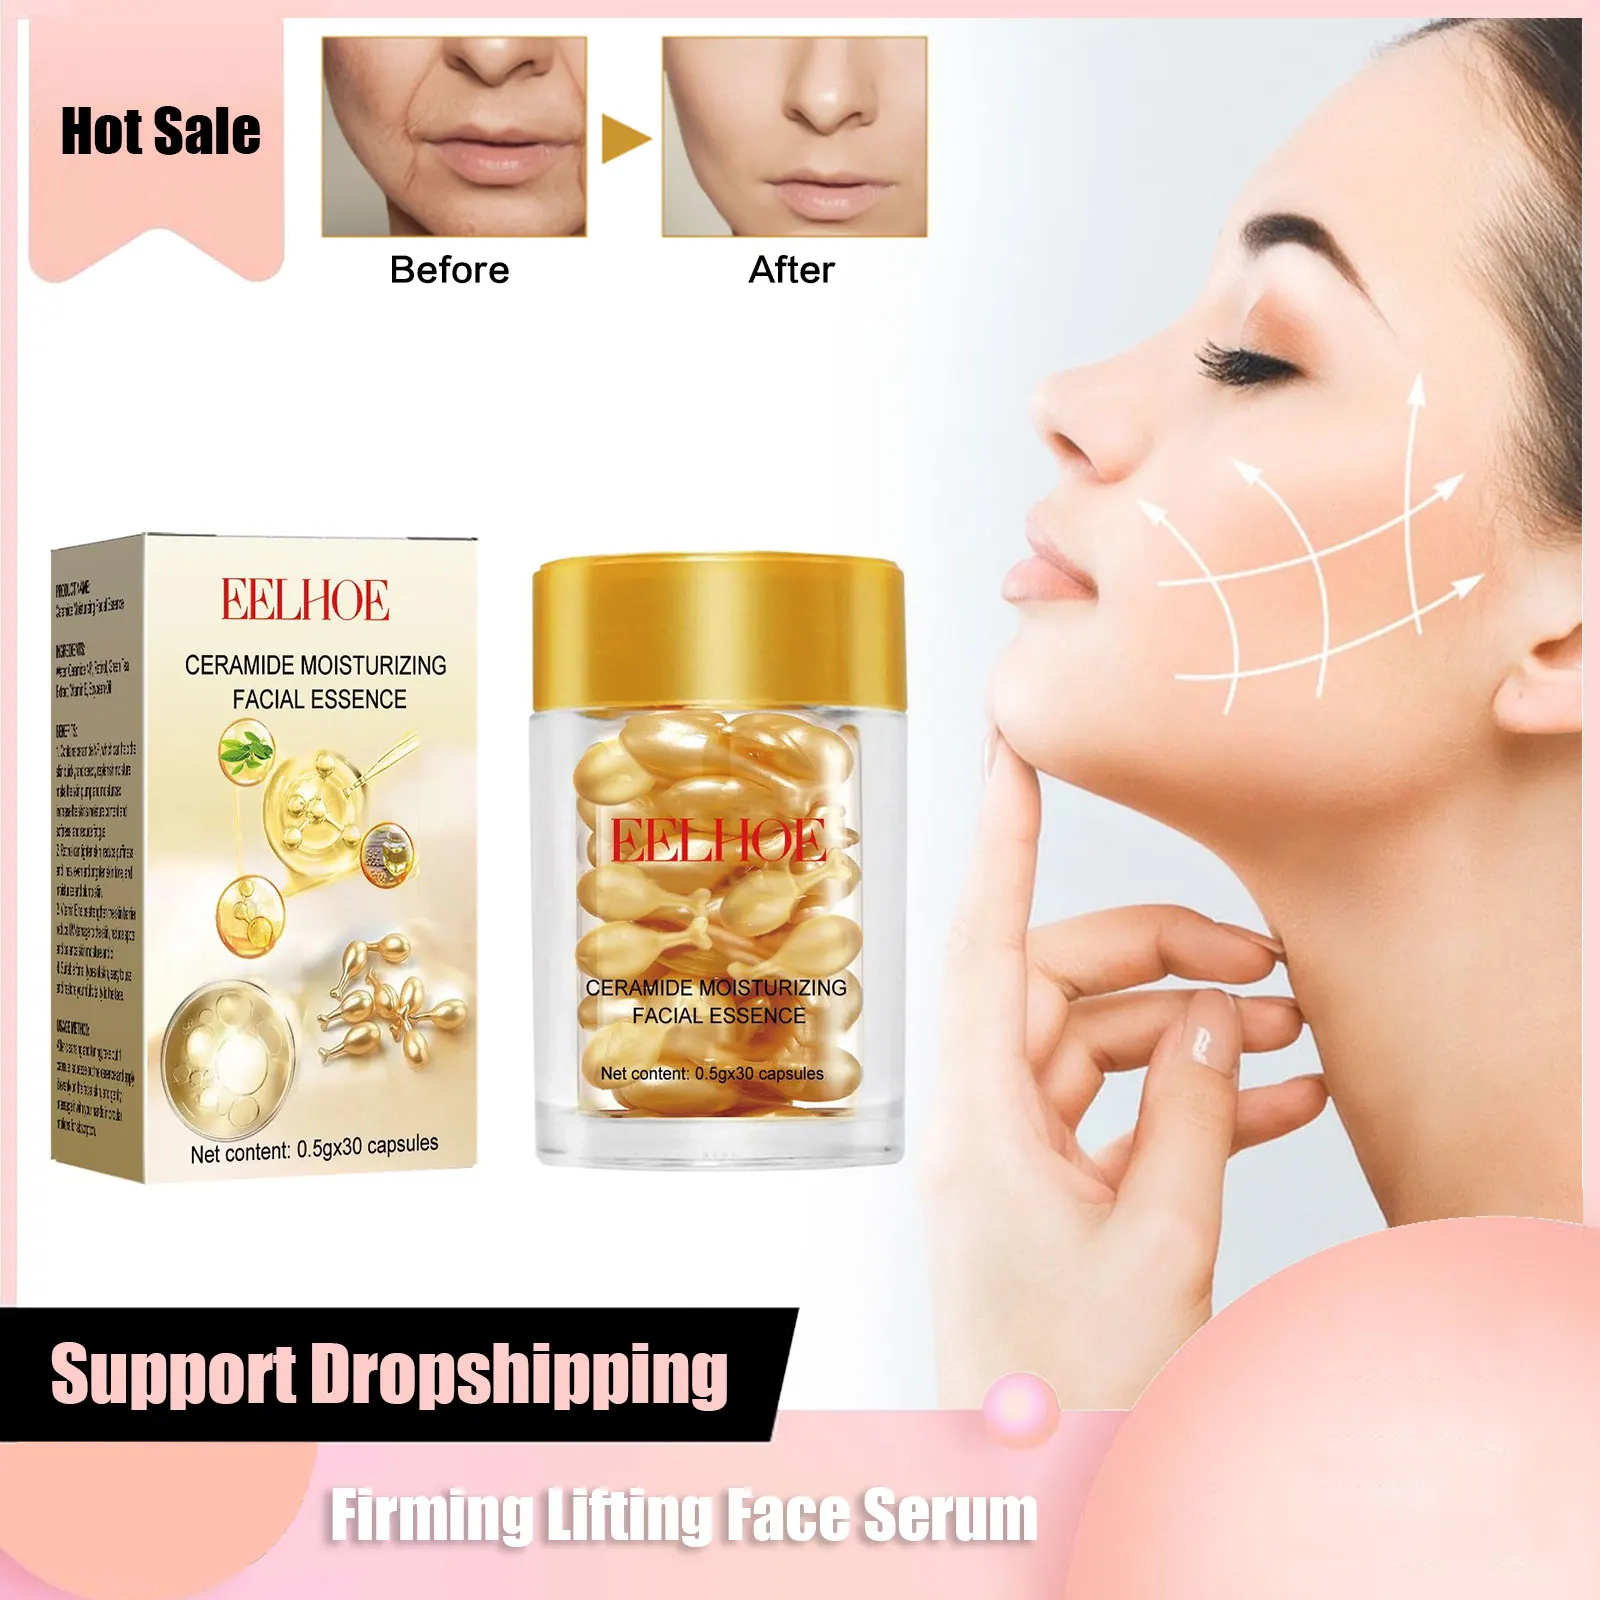 

Ceramide Face Serum Anti Aging Remove Face Neck Forehead Wrinkles Fade Fine Lines Shrink Pores Moisturizing Skin Firming Essence